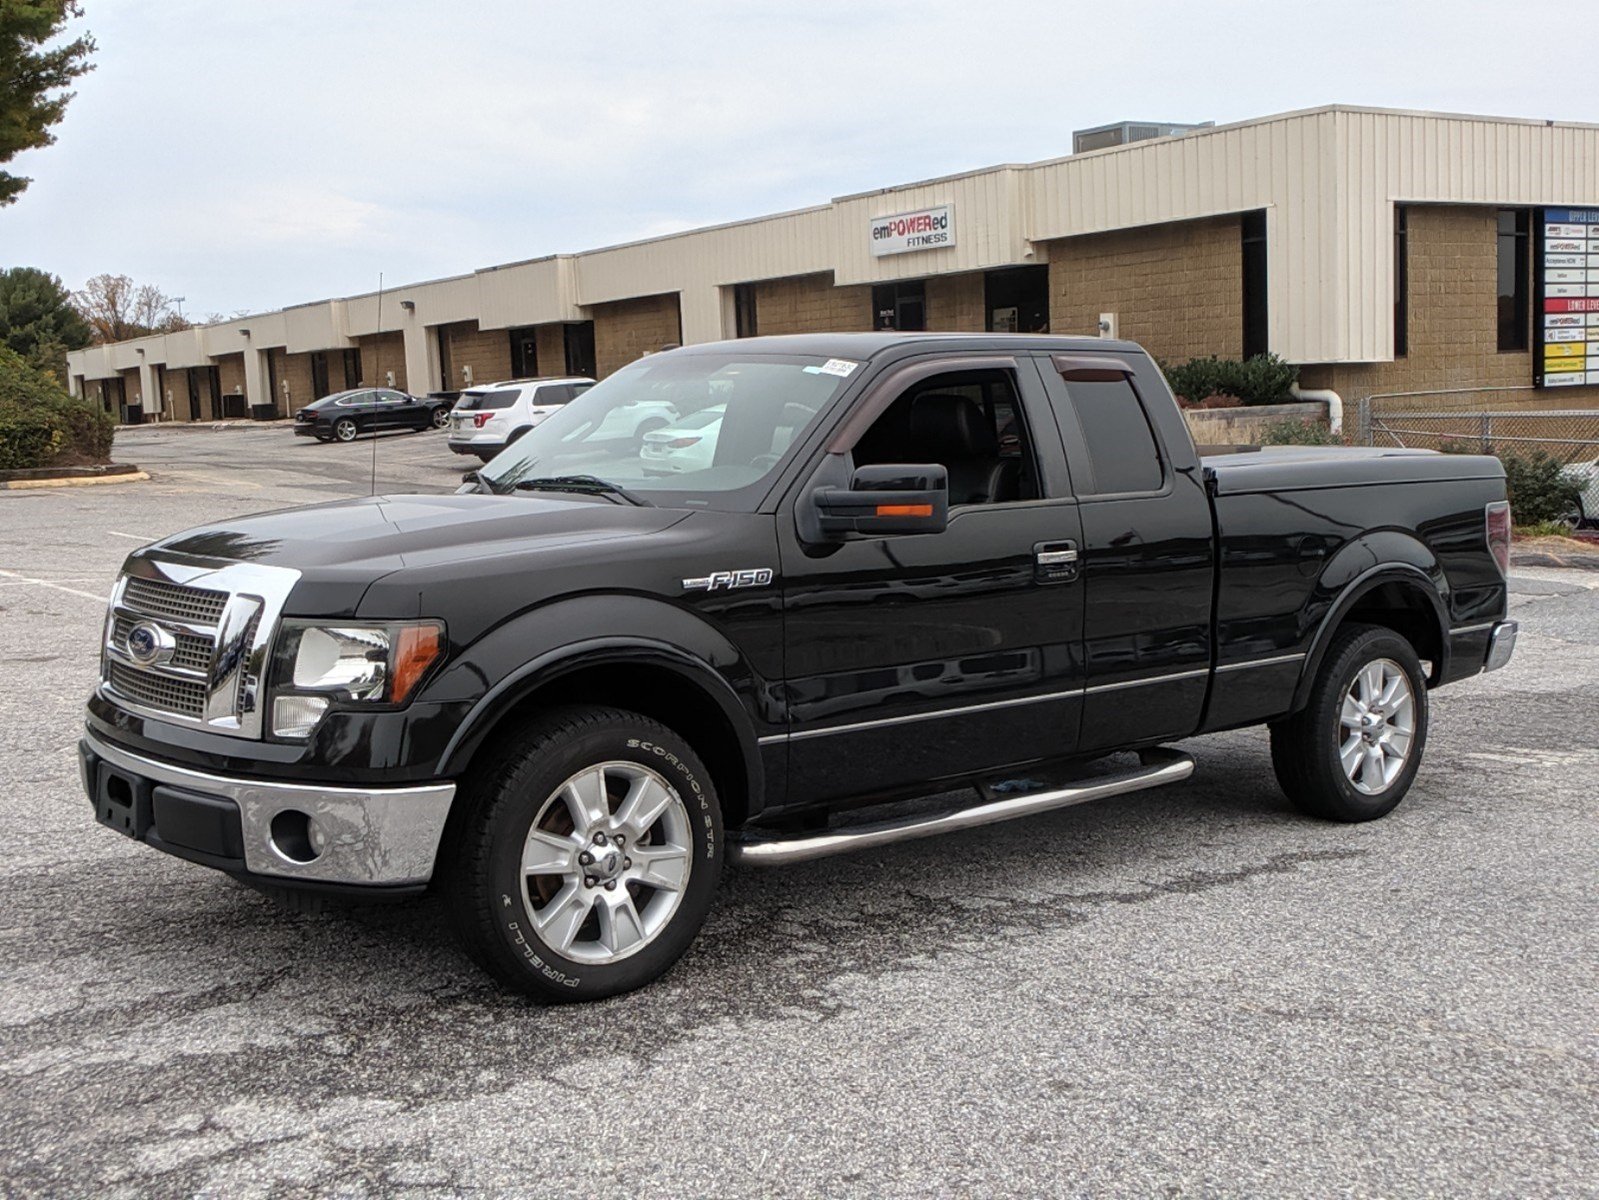 Pre-Owned 2010 Ford F-150 Lariat RWD Extended Cab Pickup